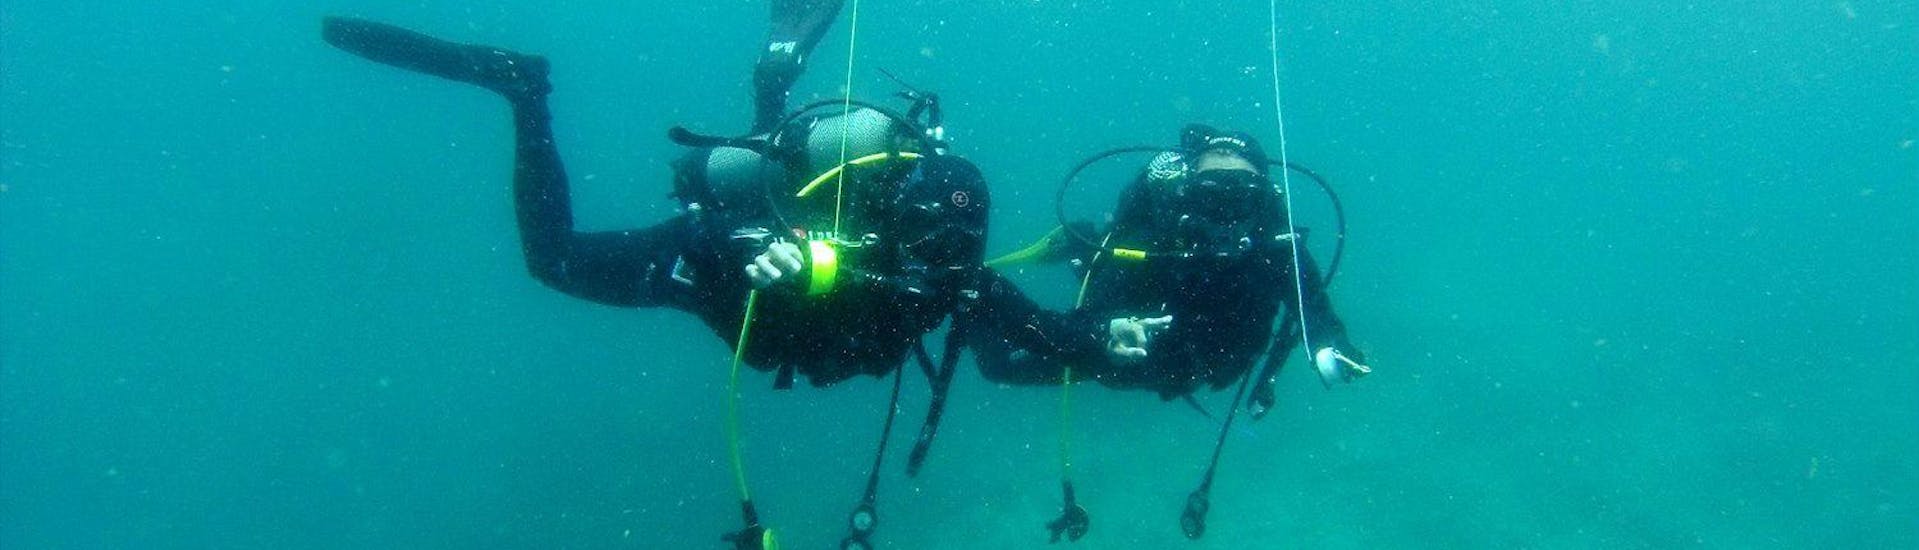 Guided Dives in Madeira	for Certified Divers with Haliotis Madeira - Hero image